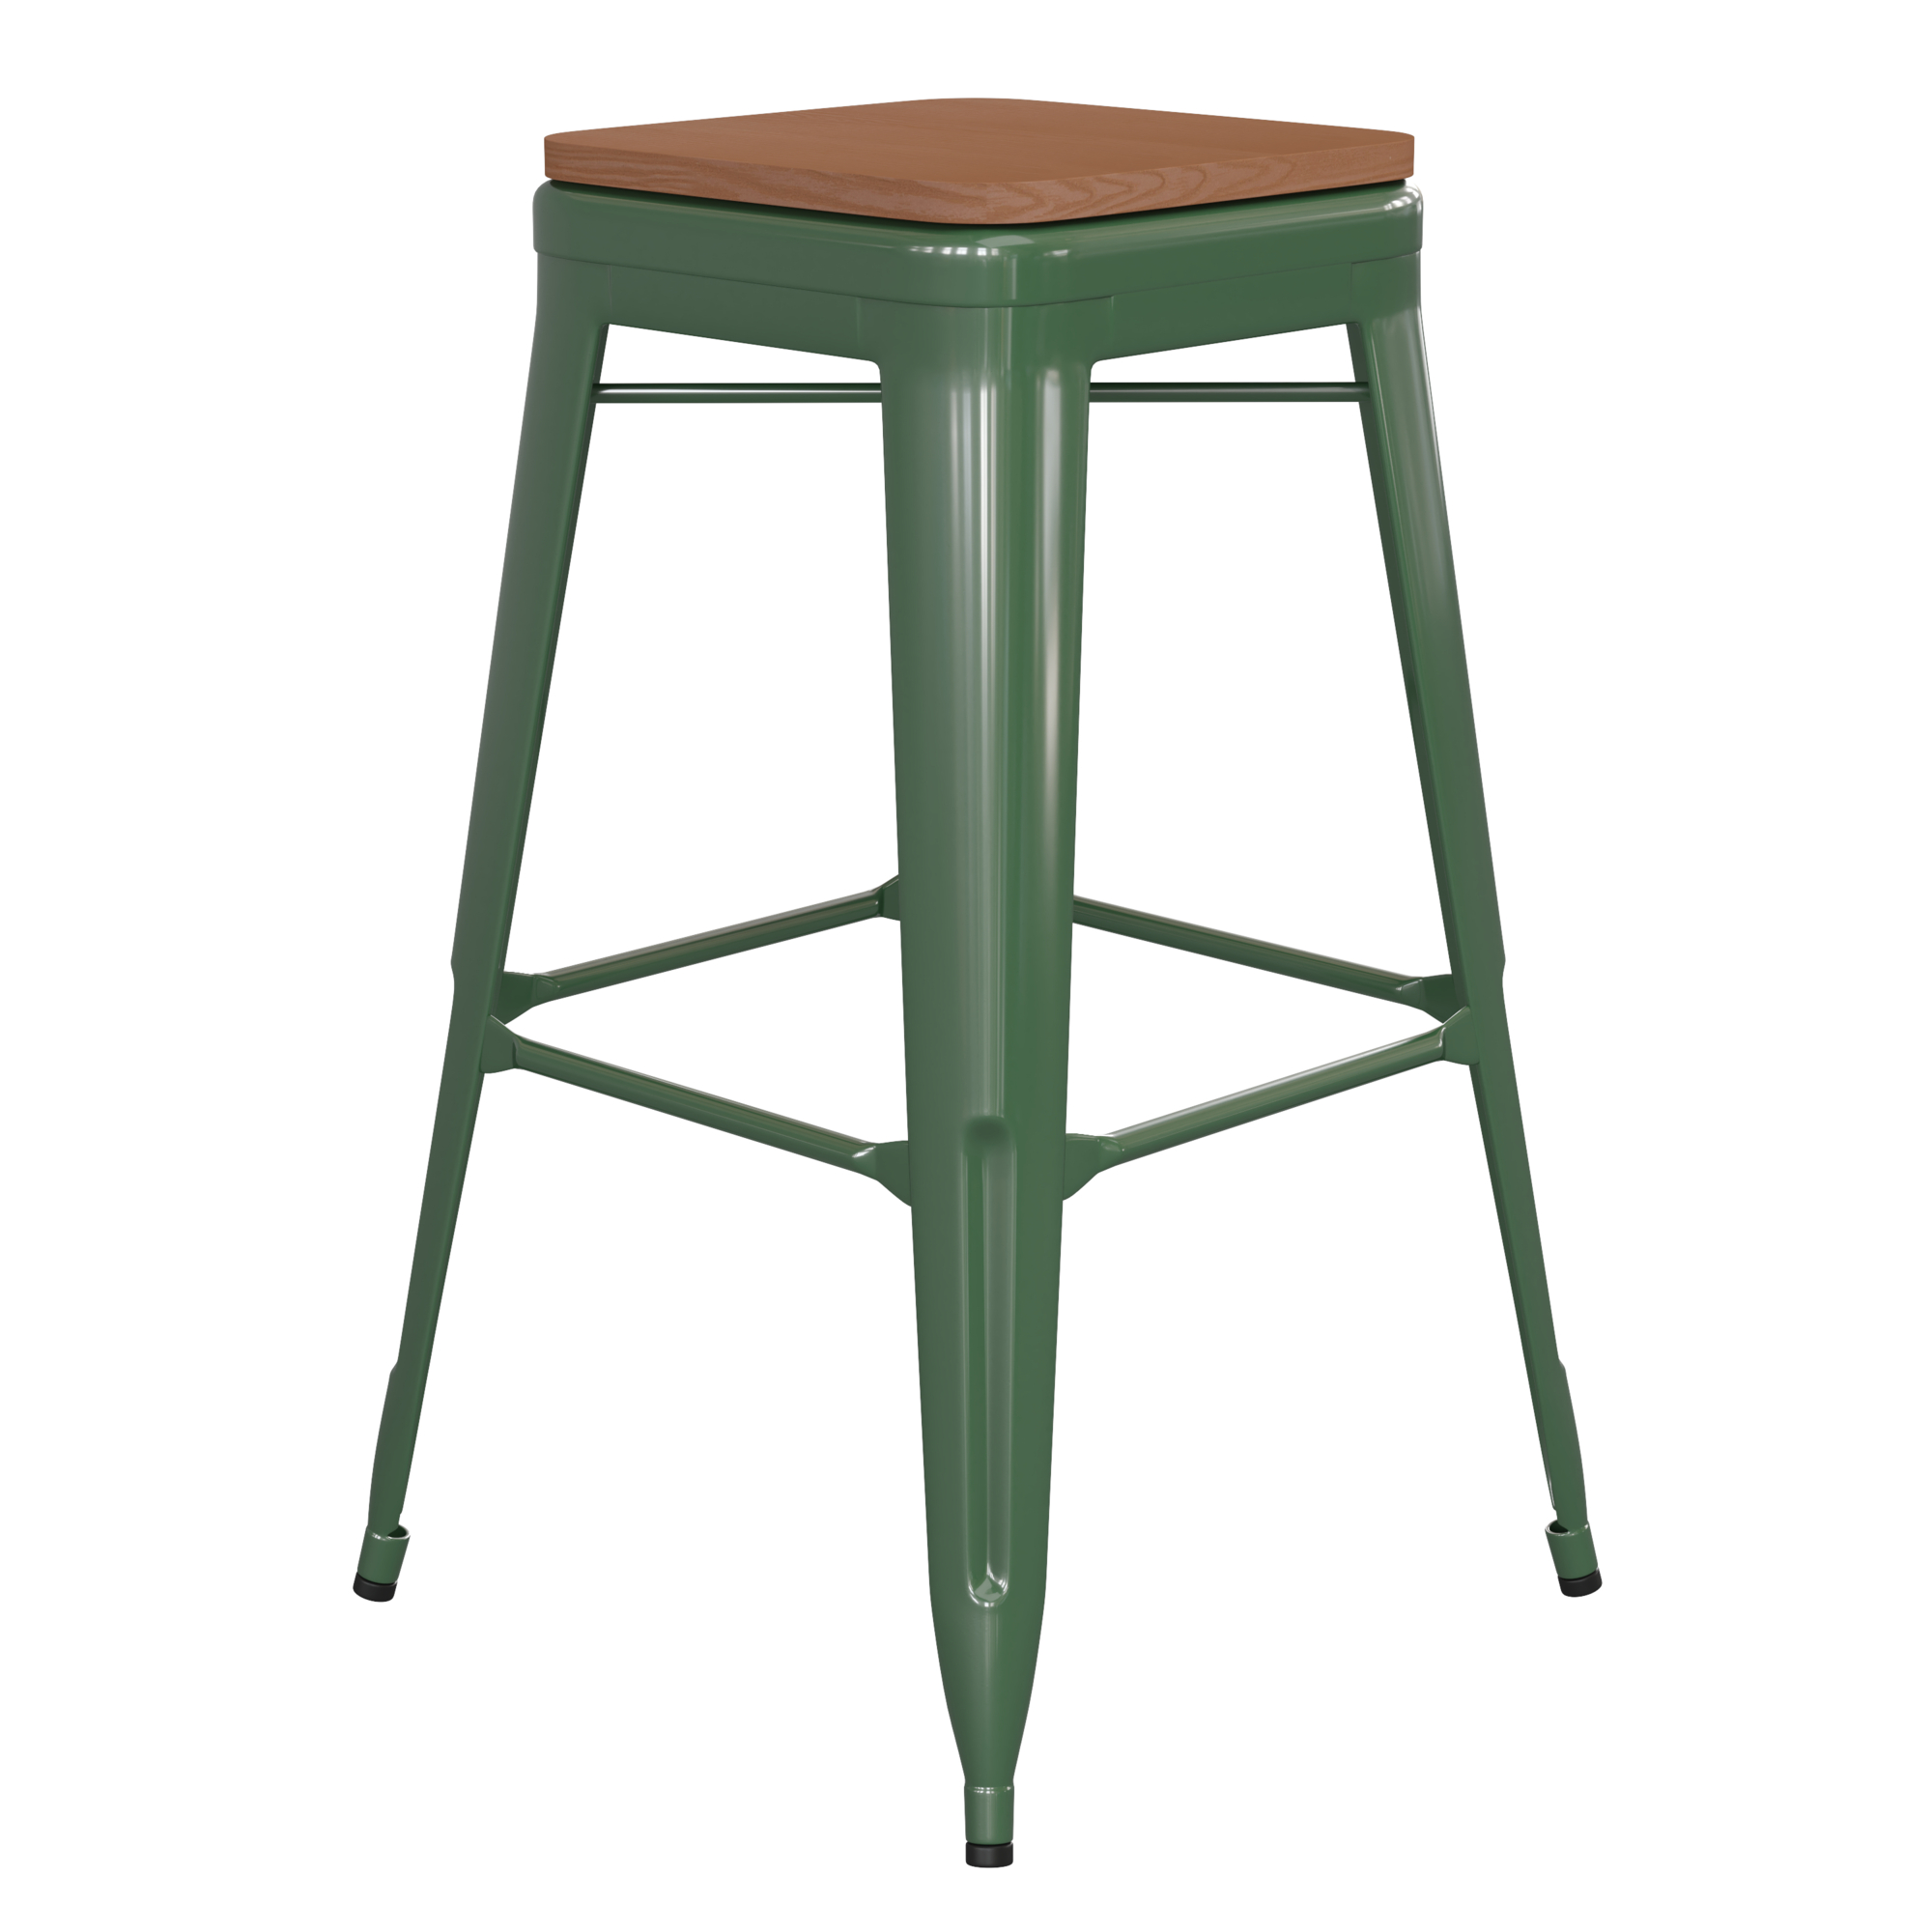 Flash Furniture, 30Inch Green Metal Stool-Teak Poly Seat, Primary Color Green, Included (qty.) 1, Model CH3132030GNPL2T